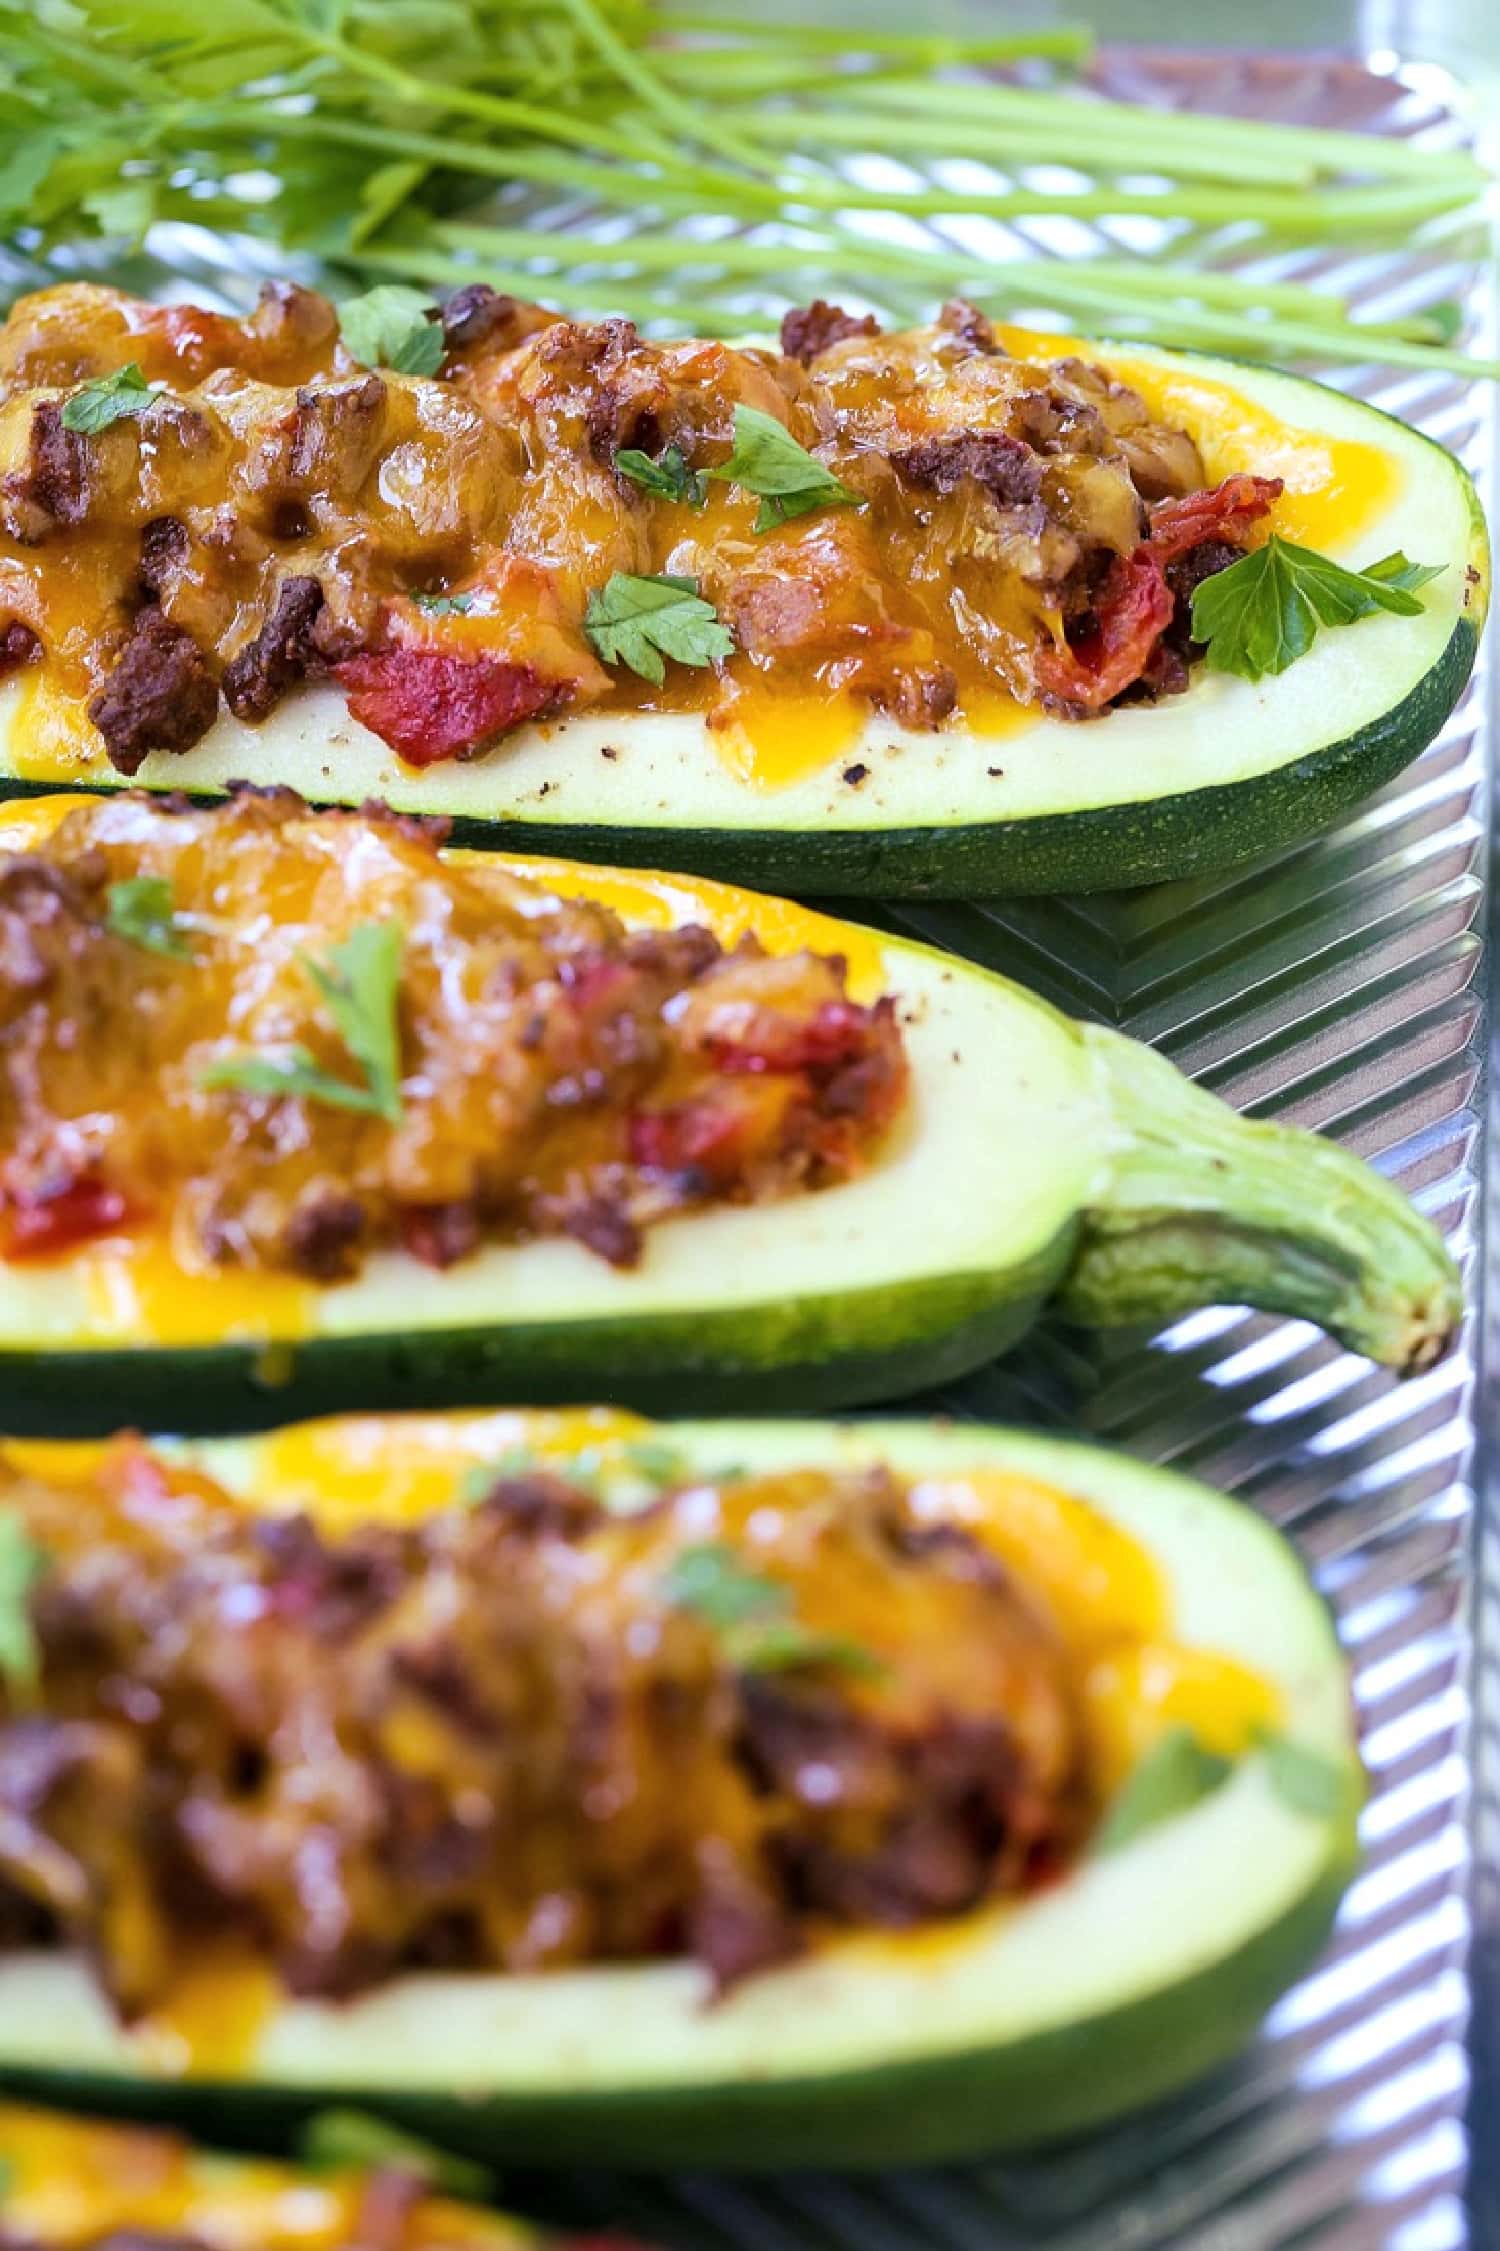 zucchini boats stuffed withe ground beef and cheese